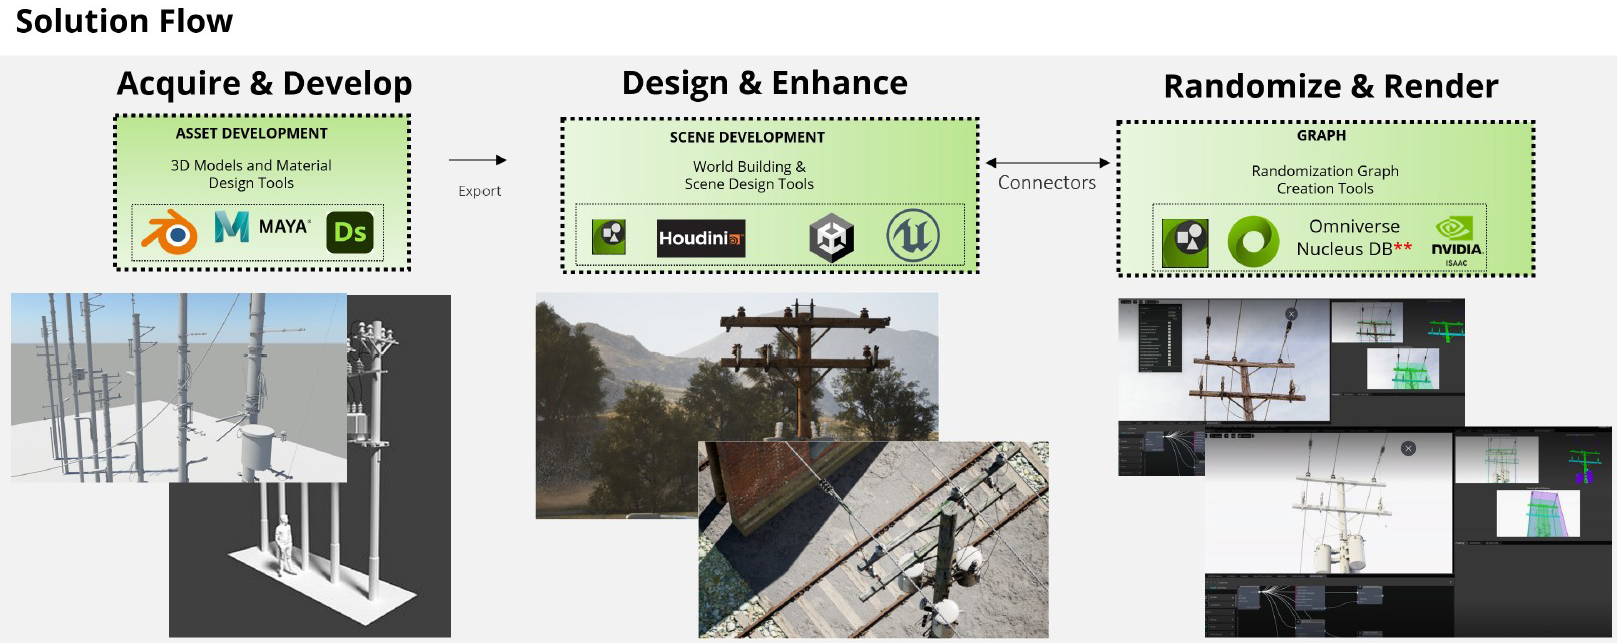 Solution flow from Deloitte showing asset development for 3D models and material design tools, scene development for world building and scene design tools, and randomization graphs and creation tools.